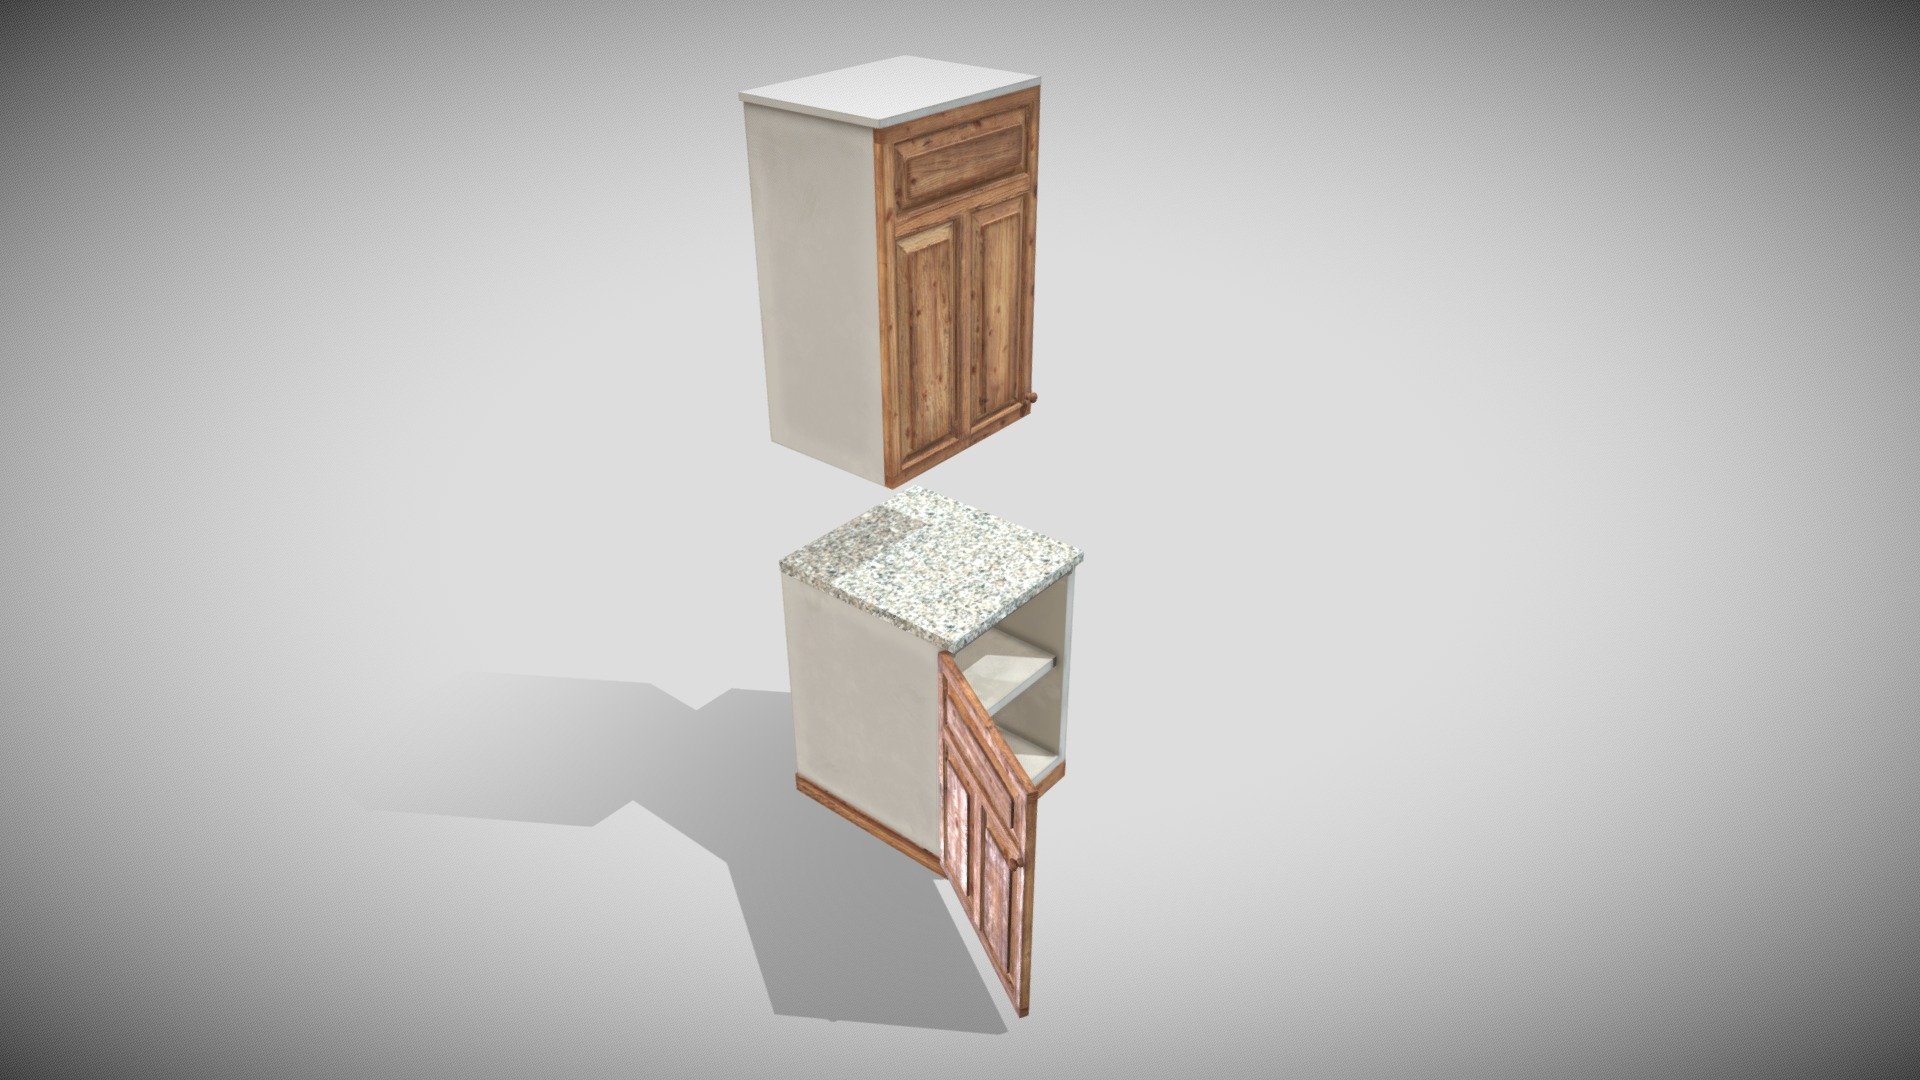 One Material PBR 4k Metalness

Pivot at Zero Bottom

Size OK

Door are separate objects with Pivot in right place and can be animated

Complete Compilatio https://skfb.ly/ovXFn - Kitchen Modules - Mod I - Buy Royalty Free 3D model by Francesco Coldesina (@topfrank2013) 3d model